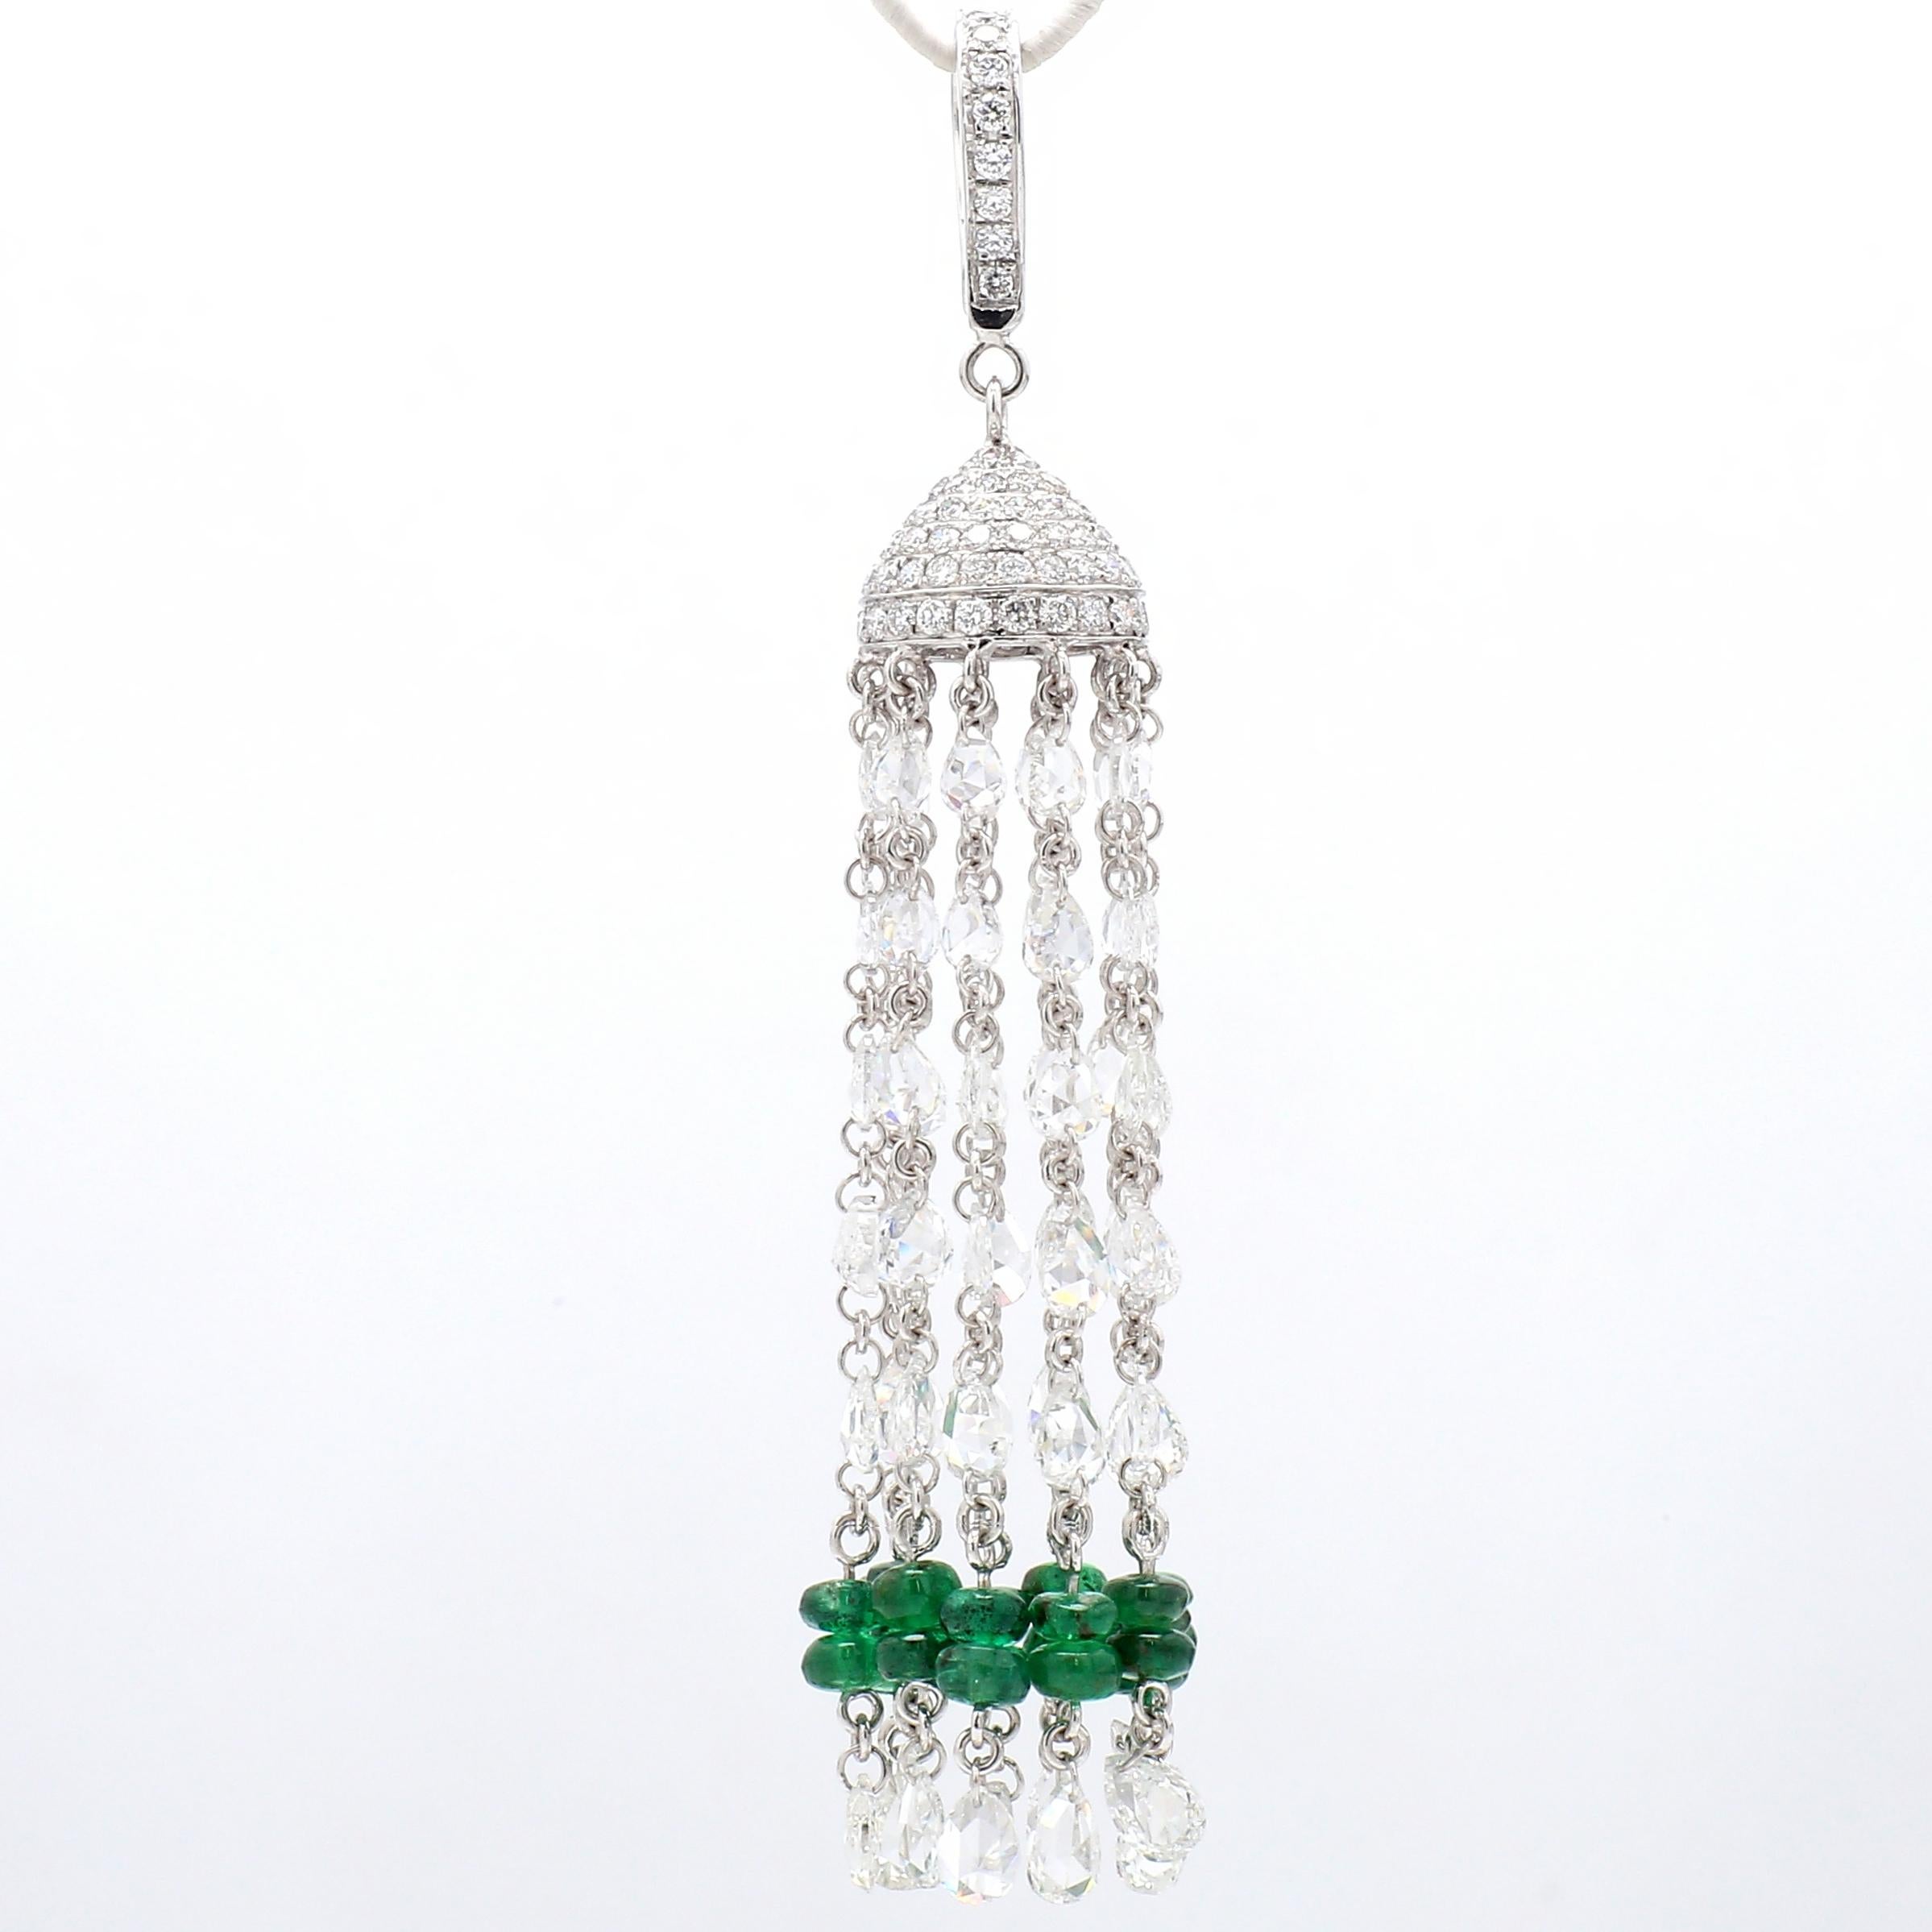 PANIM 18K White Gold Diamond Rosecut & Emerald Tassel  Pendent

Explore our superlative contemporary pendent that will not only complement but enhance every mood and outfit of yours! It features diamond rosecut linked to each other with 18k white